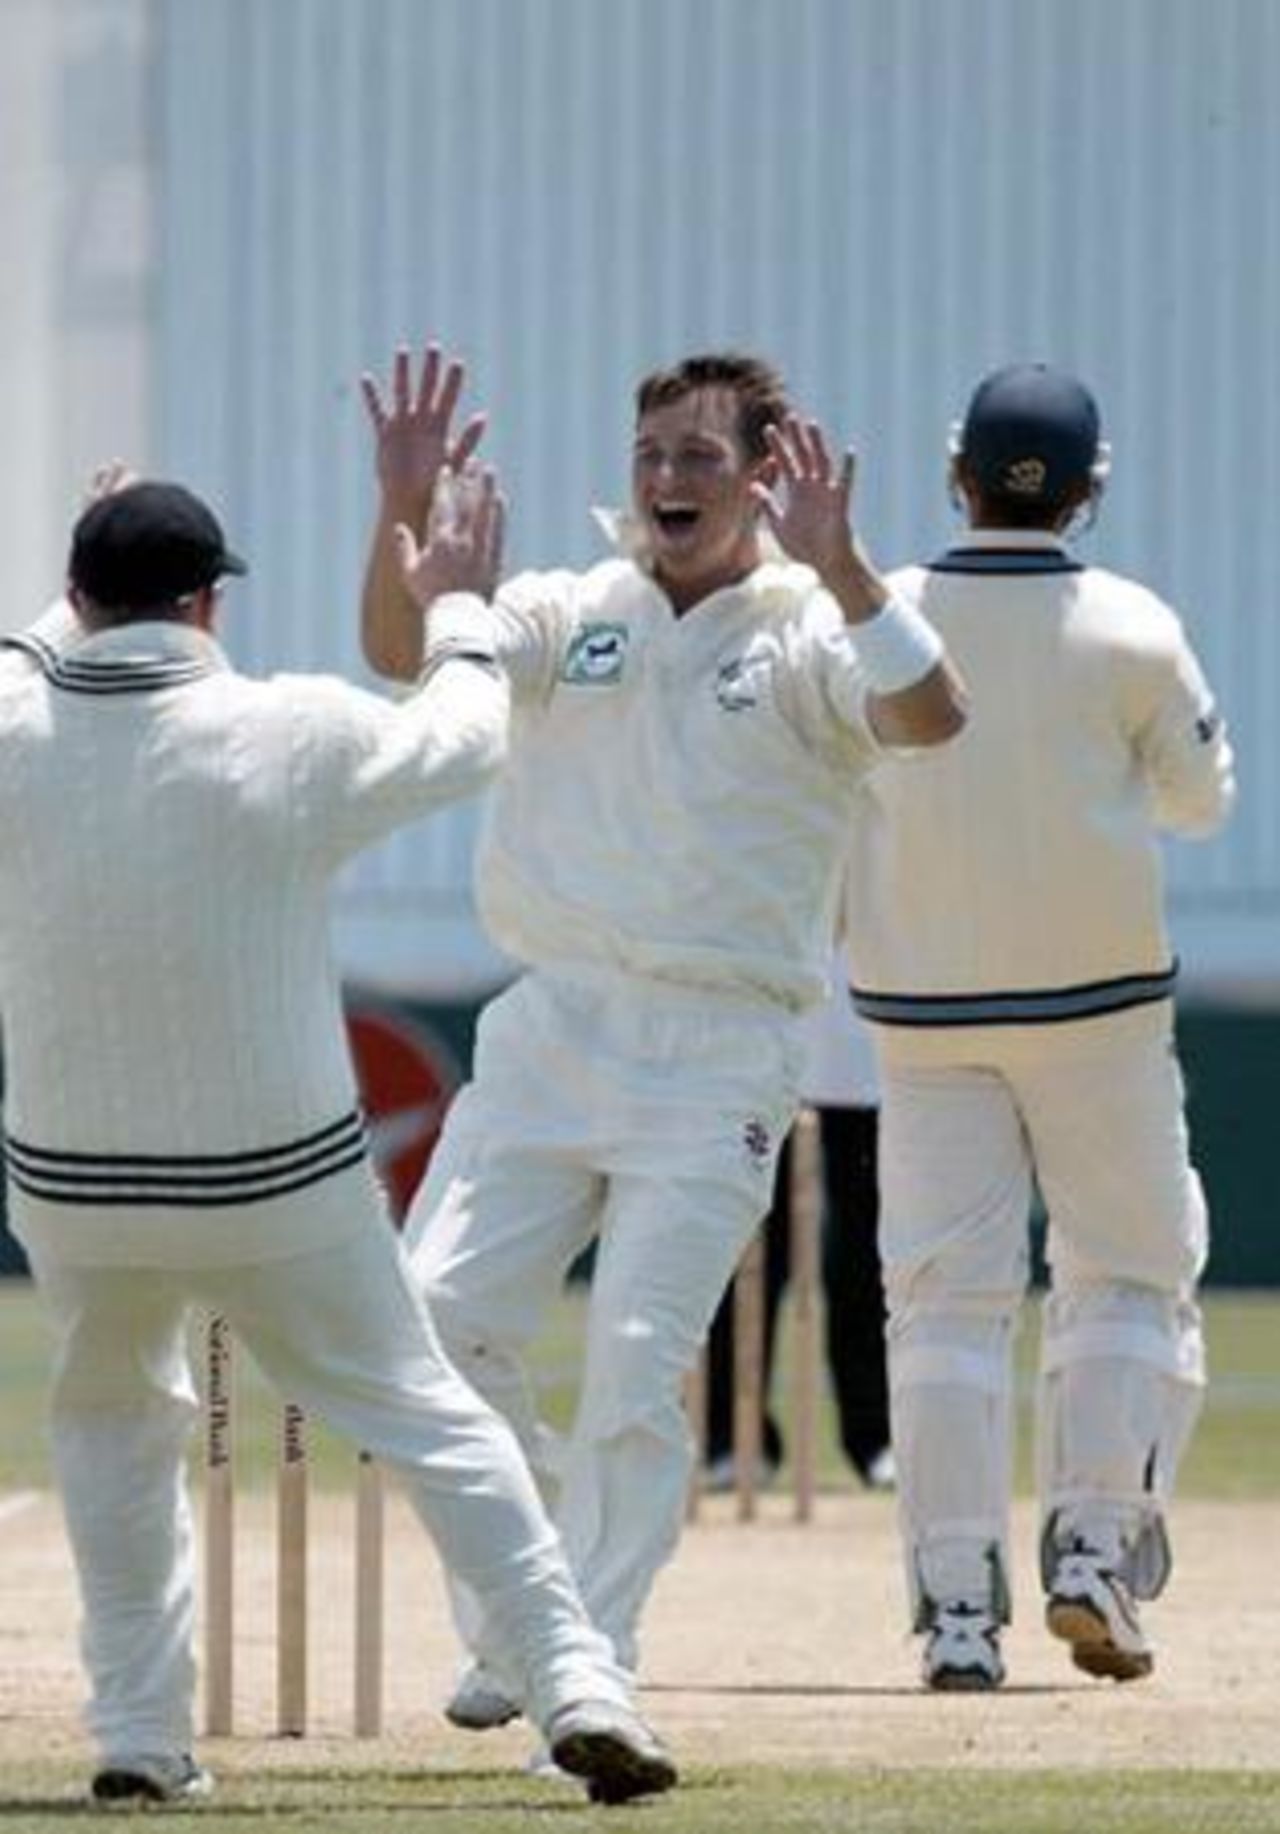 New Zealand bowler Shane Bond (centre) and team-mate Scott Styris celebrate the dismissal of Indian batsman Rahul Dravid, bowled in his second innings for seven. 1st Test: New Zealand v India at Basin Reserve, Wellington, 12-16 December 2002 (14 December 2002).